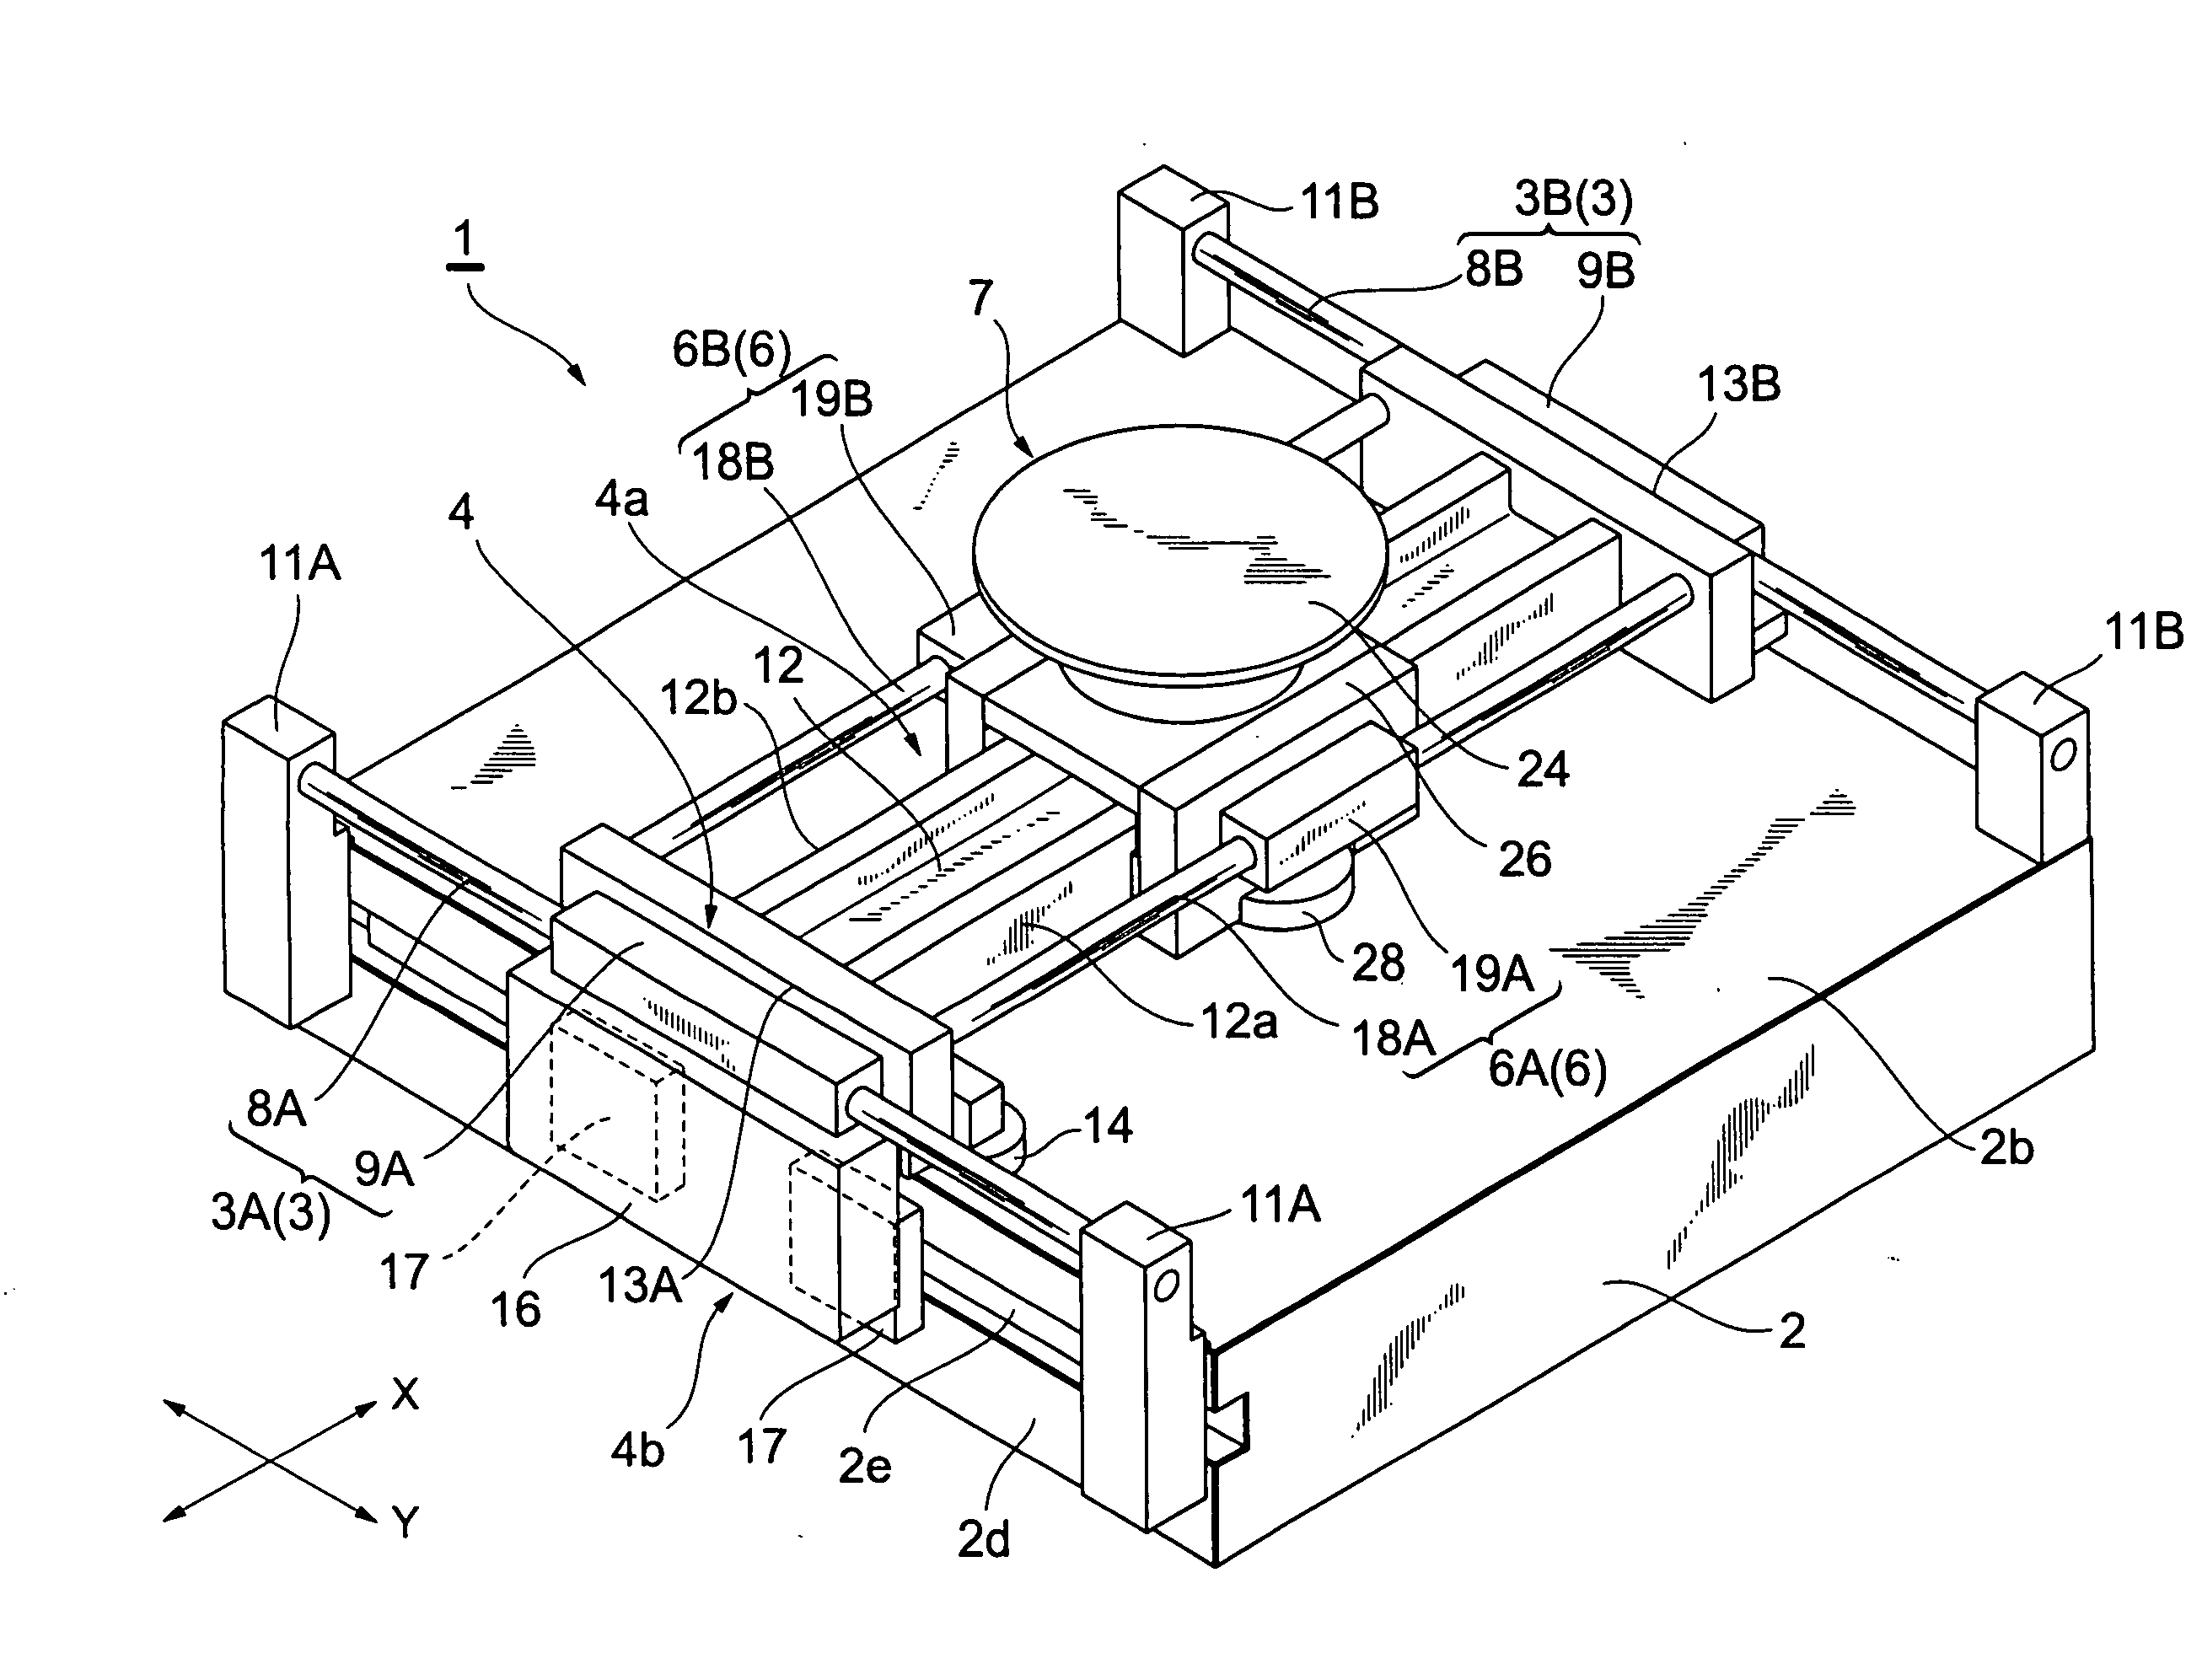 Stage apparatus